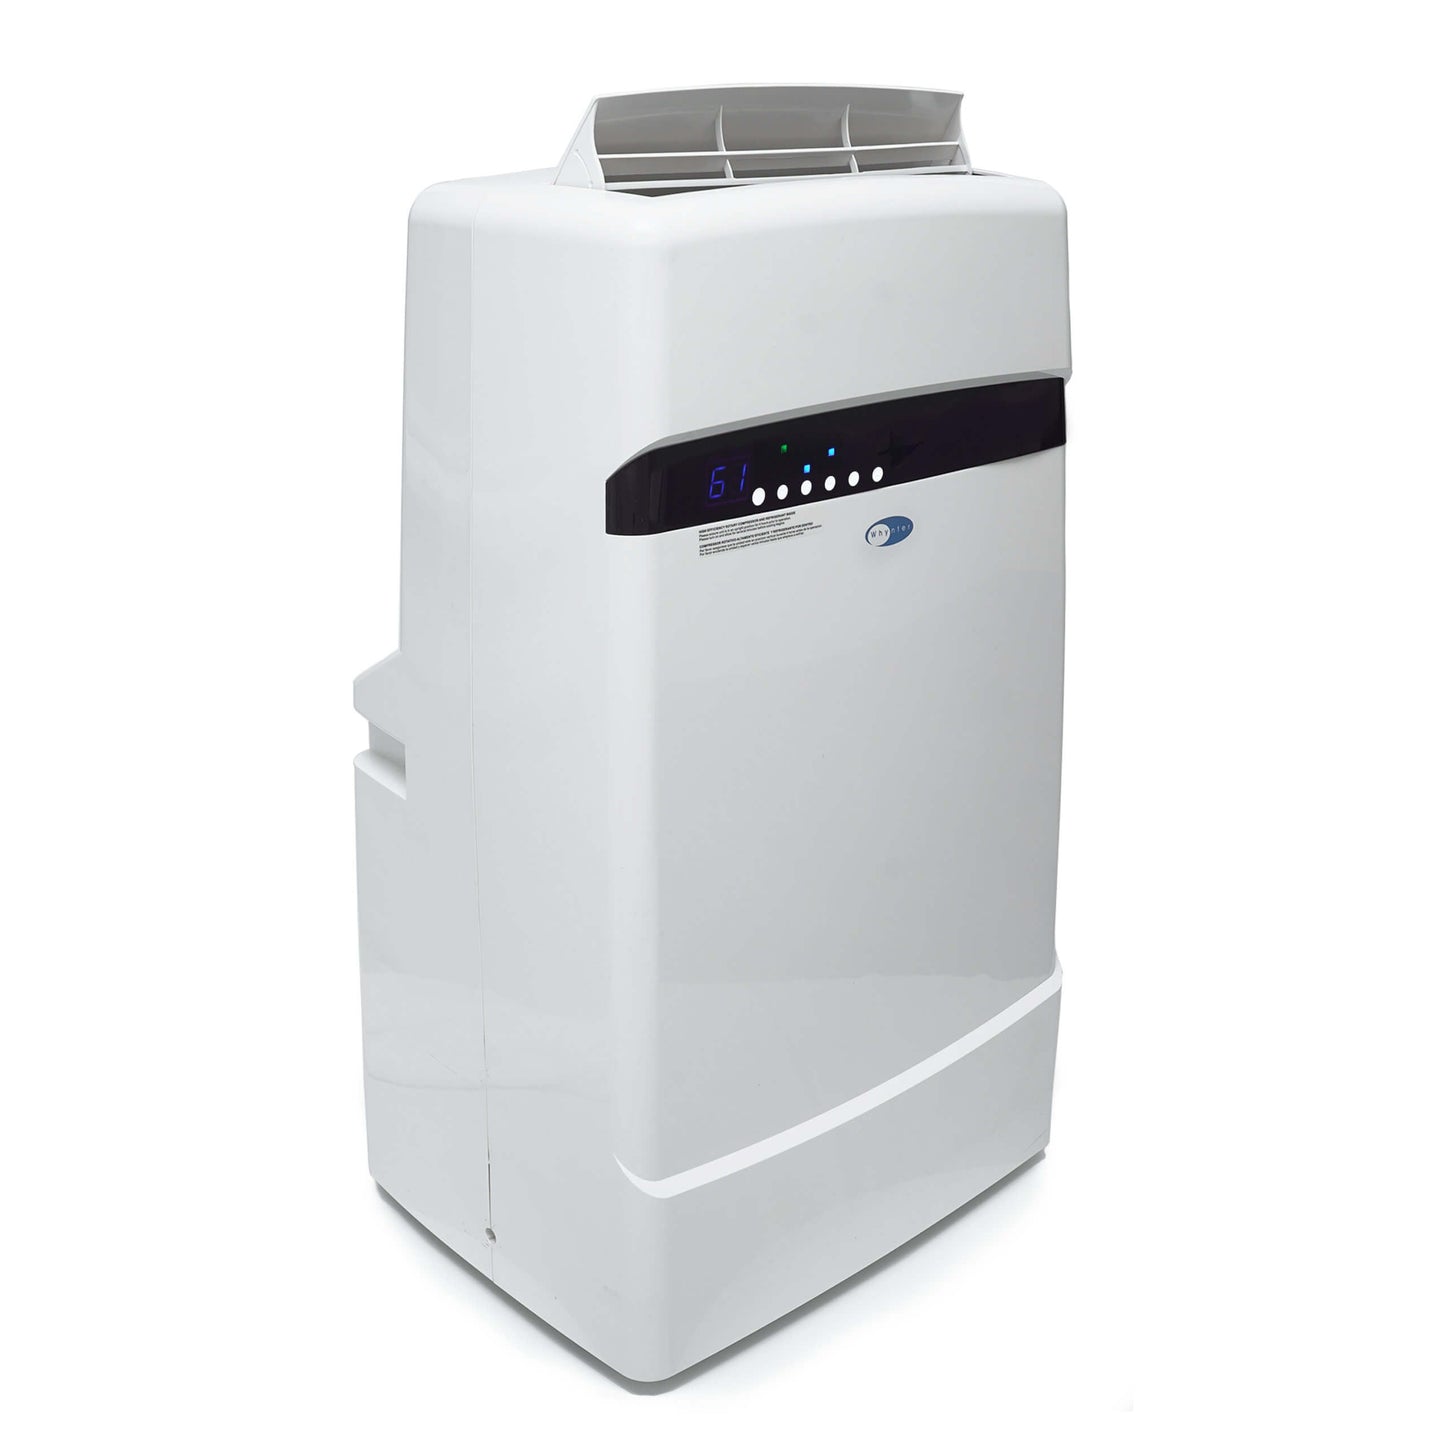 Whynter Air Conditioners Whynter ARC-12SDH 12,000 BTU (6,884 BTU SACC) Dual Hose Cooling Portable Air Conditioner, Heater, Dehumidifier, and Fan with Activated Carbon Filter plus Storage bag, up to 400 sq ft in White